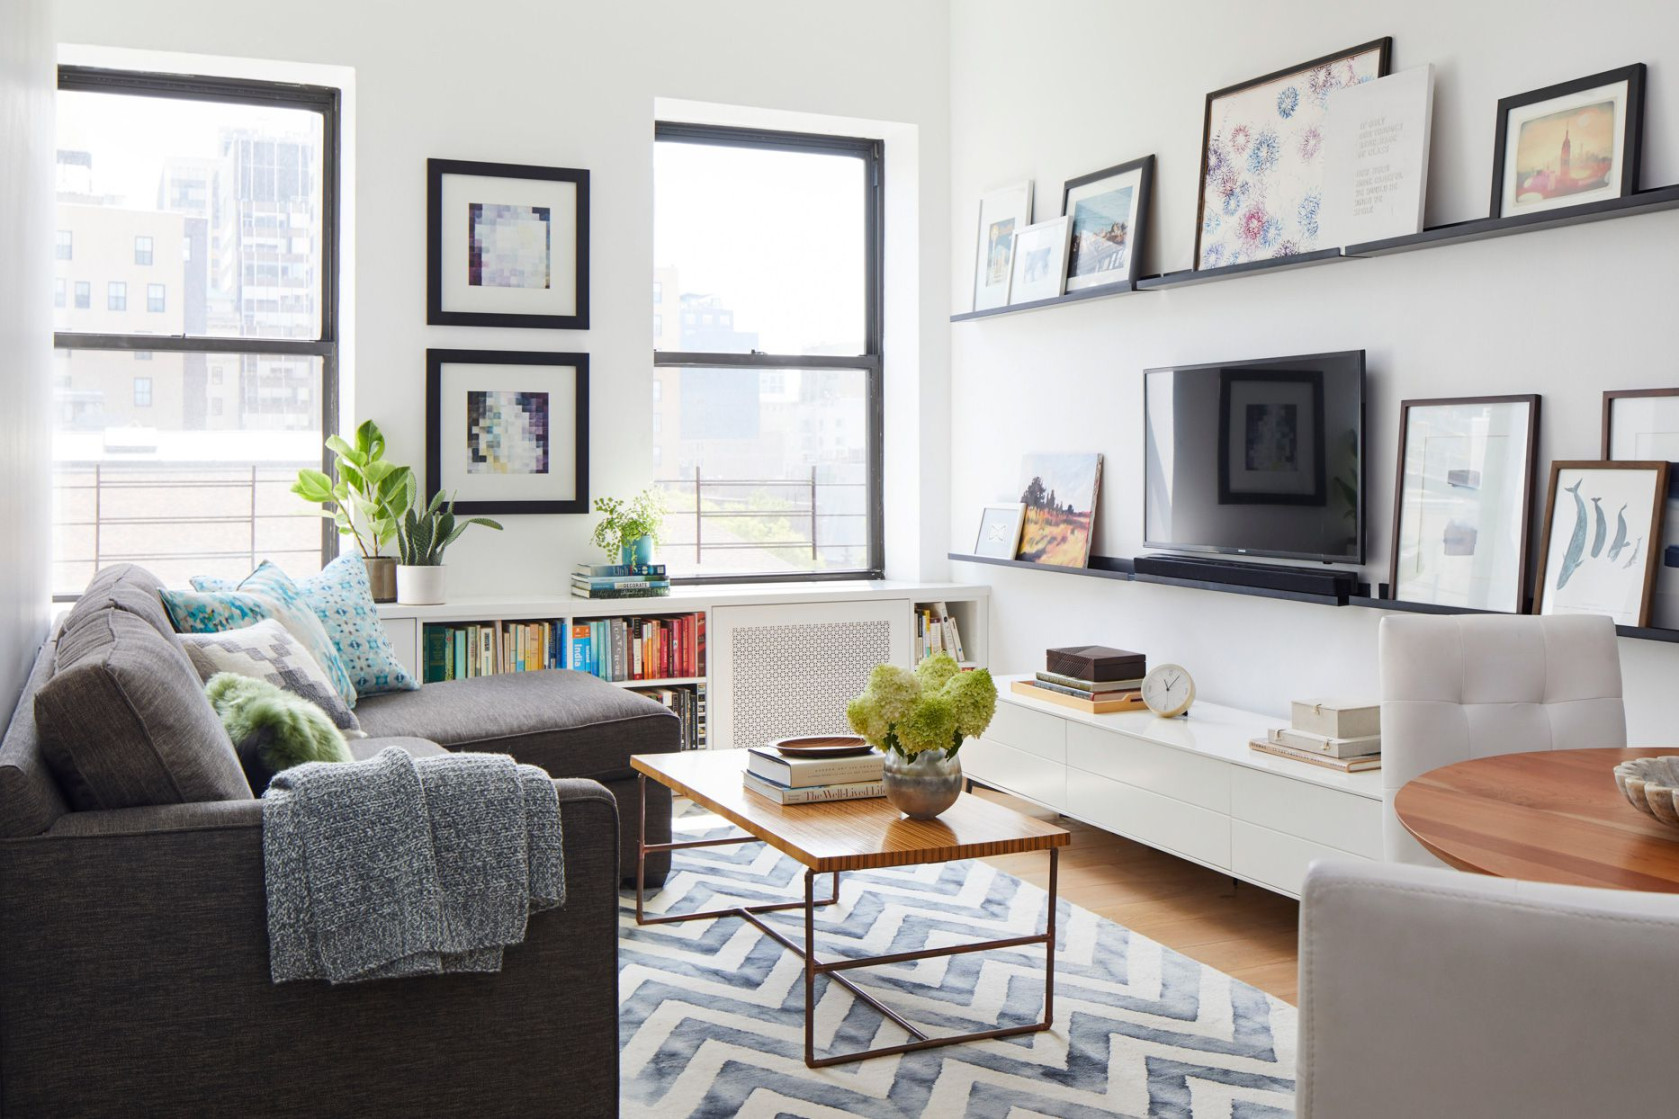 Small Living Room Ideas That Maximize Style and Storage